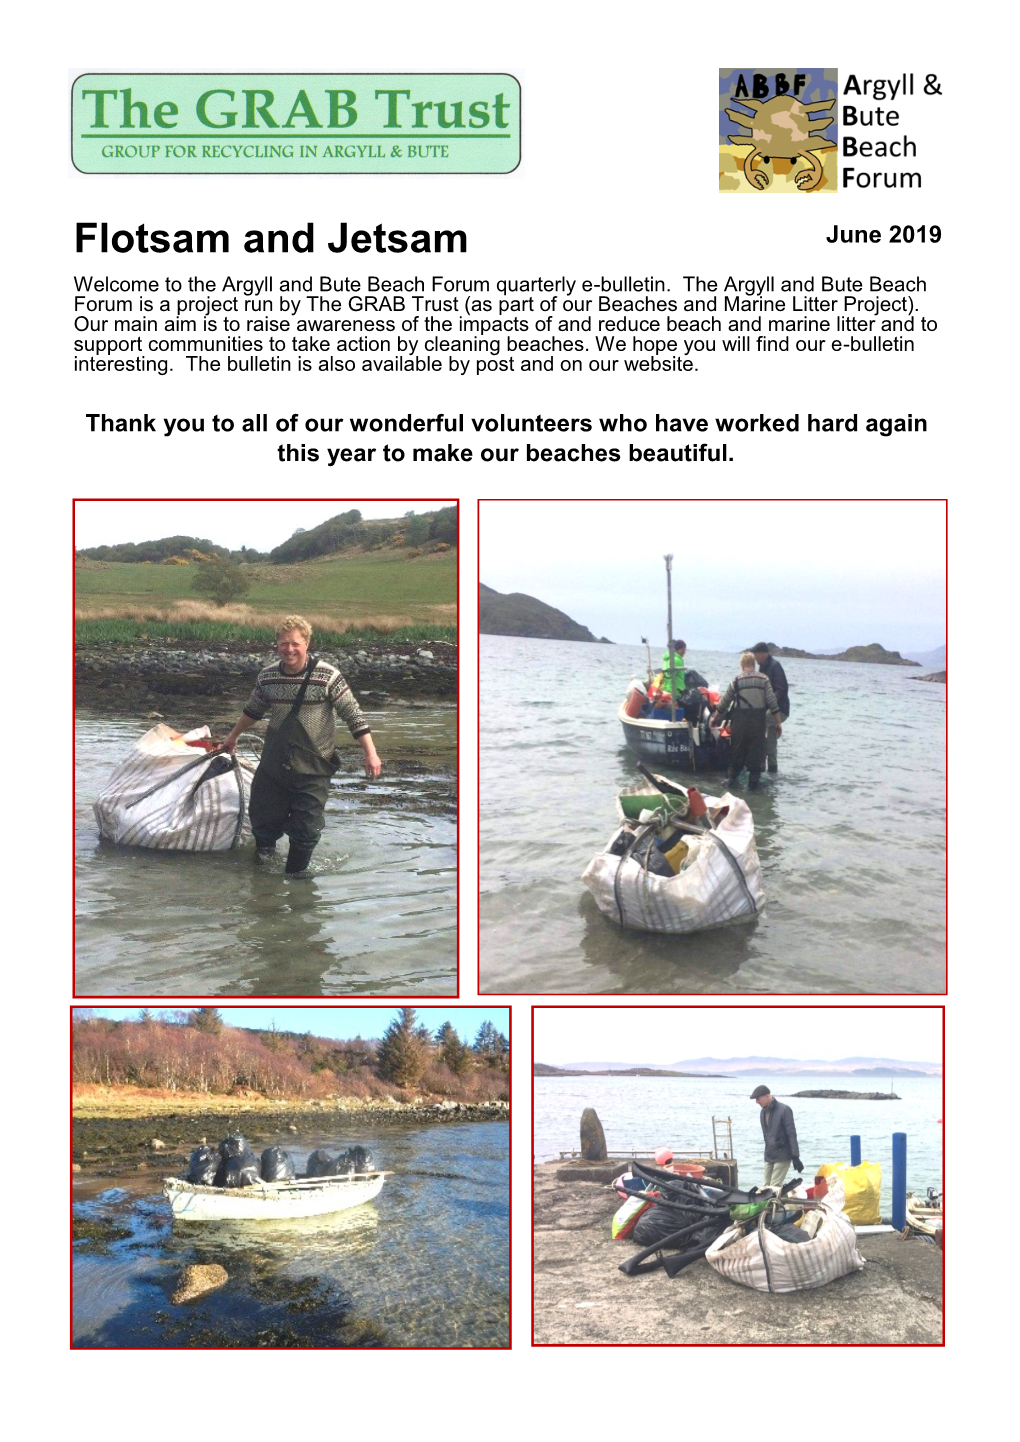 Flotsam and Jetsam June 2019 Welcome to the Argyll and Bute Beach Forum Quarterly E-Bulletin